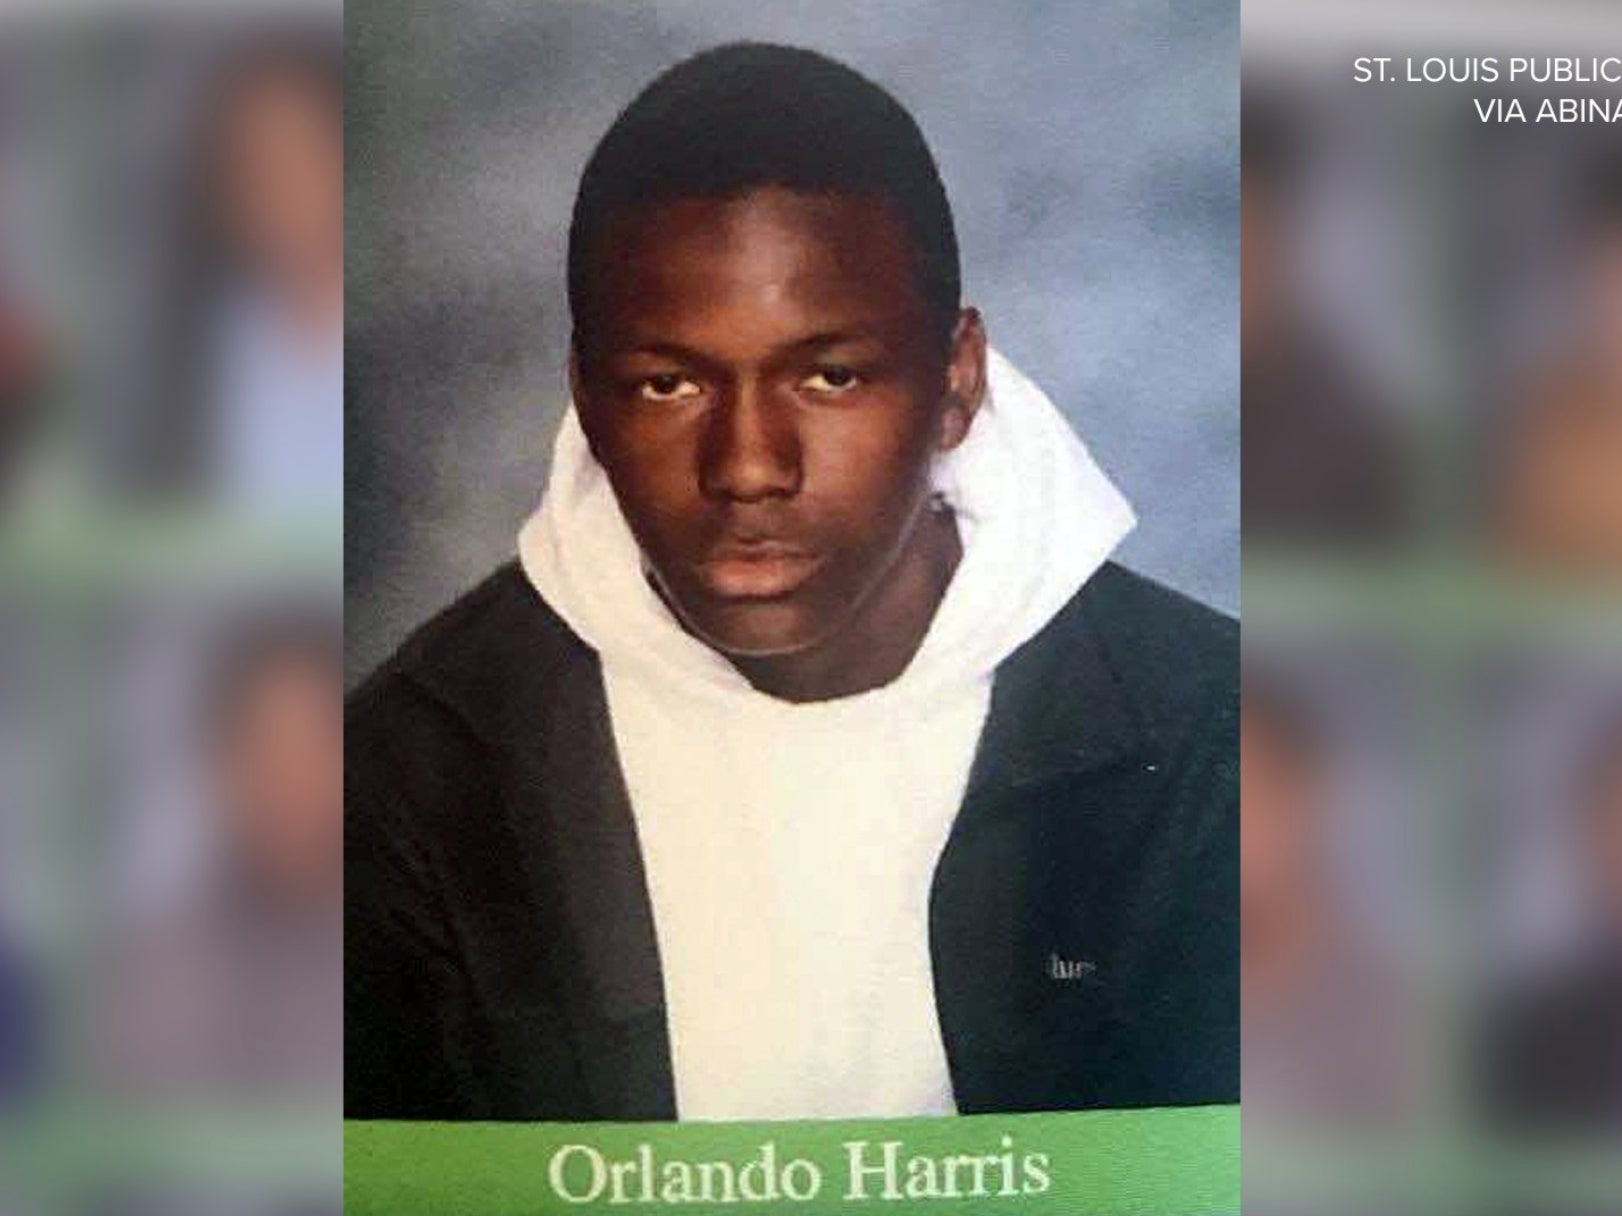 St Louis school shooter Orlando Harris is seen in a yearbook photo